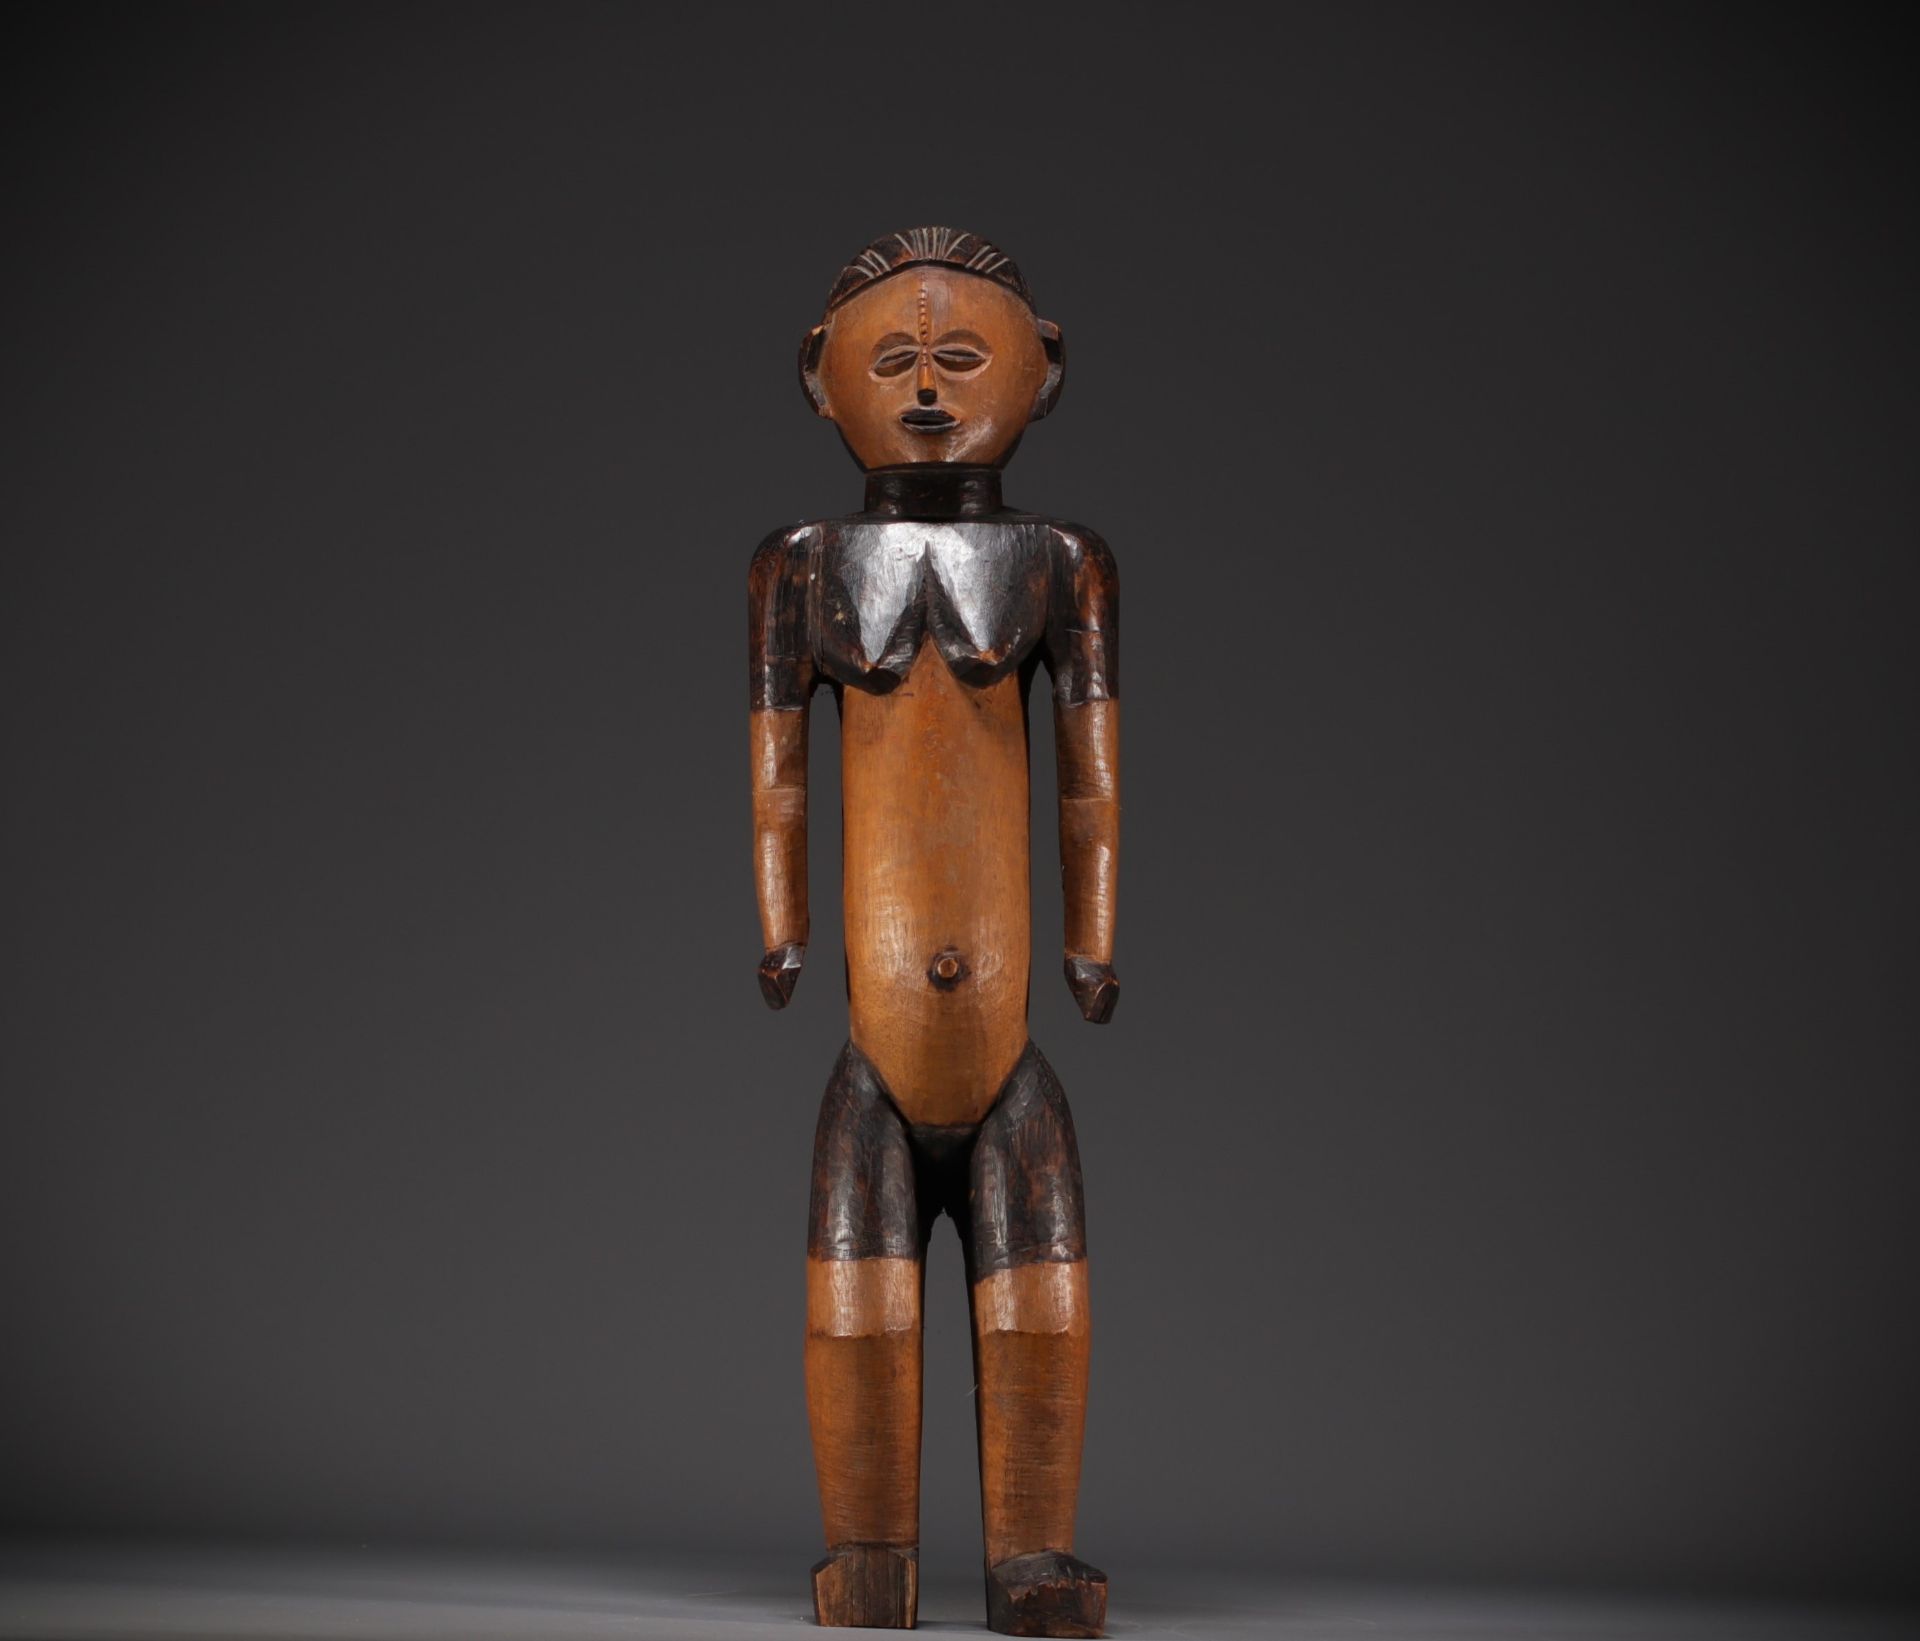 Large Mbanza or Ngbaka figure collected around 1900 - Rep.Dem.Congo - Image 2 of 5